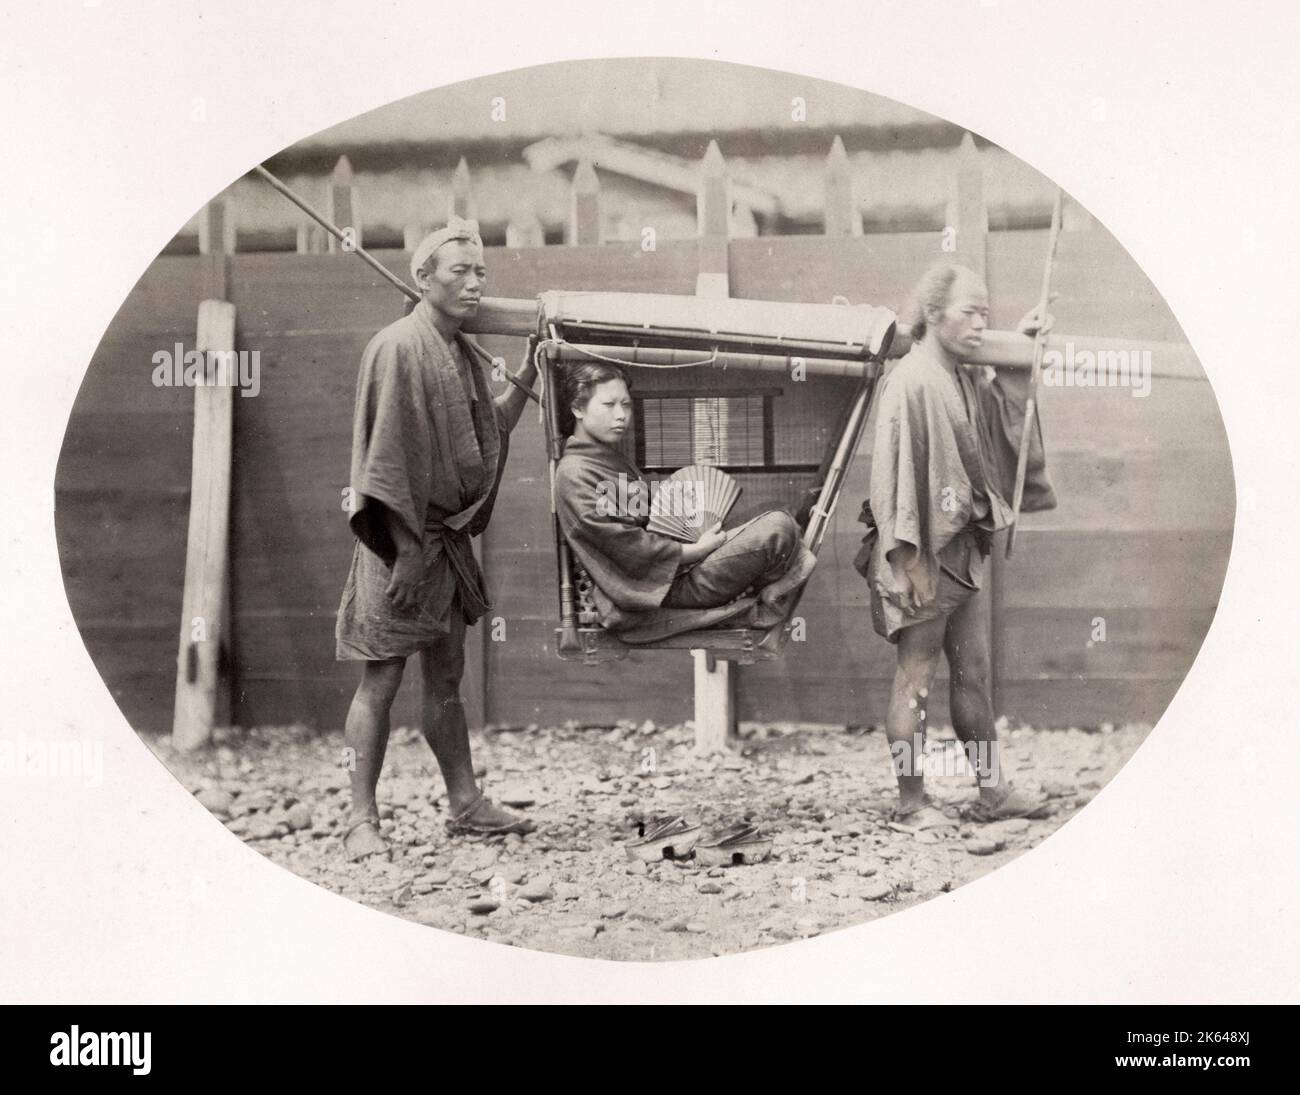 Vintage late 19th century photograph: Japanese woman in a kago, carrying chair, Japan, c.1870's. Stock Photo